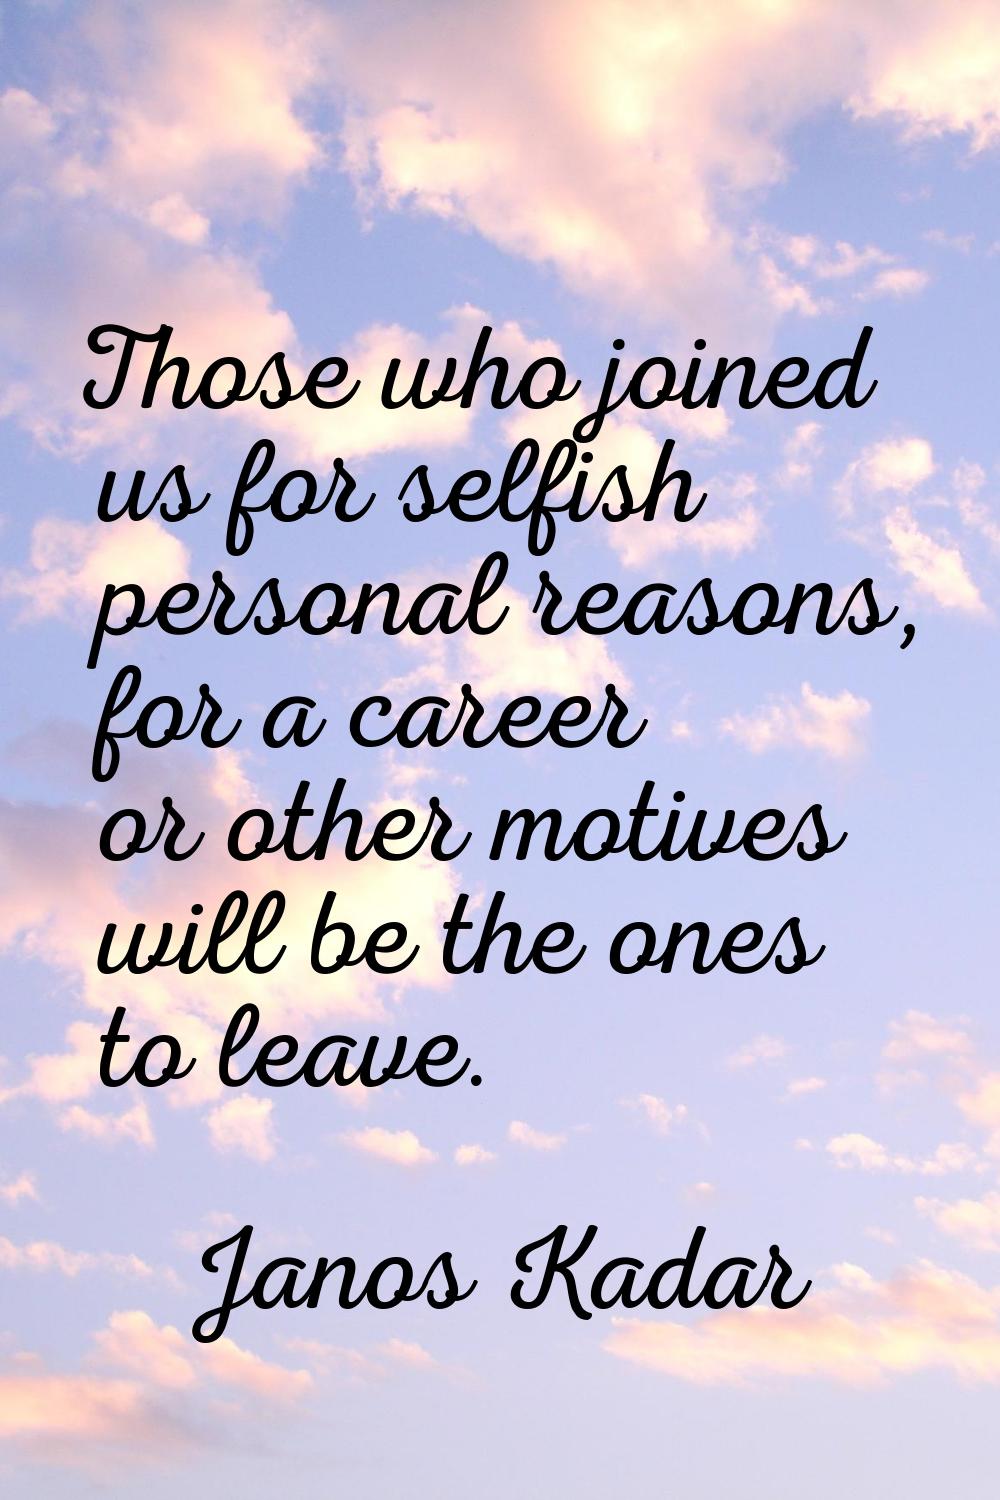 Those who joined us for selfish personal reasons, for a career or other motives will be the ones to